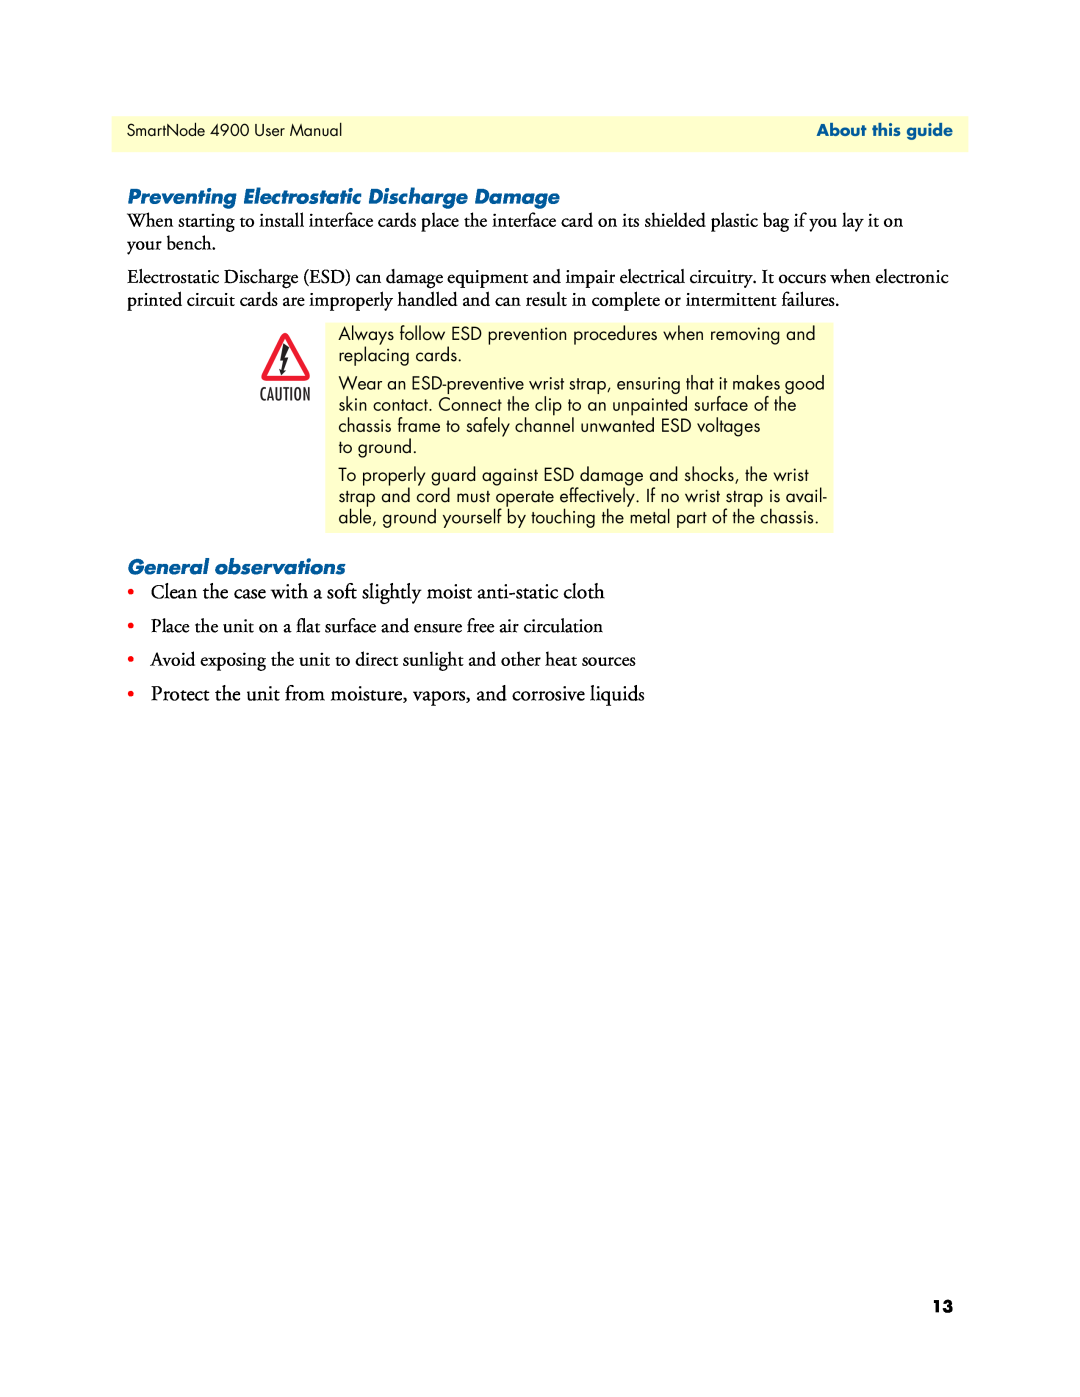 Patton electronic 4900 user manual Preventing Electrostatic Discharge Damage, General observations 